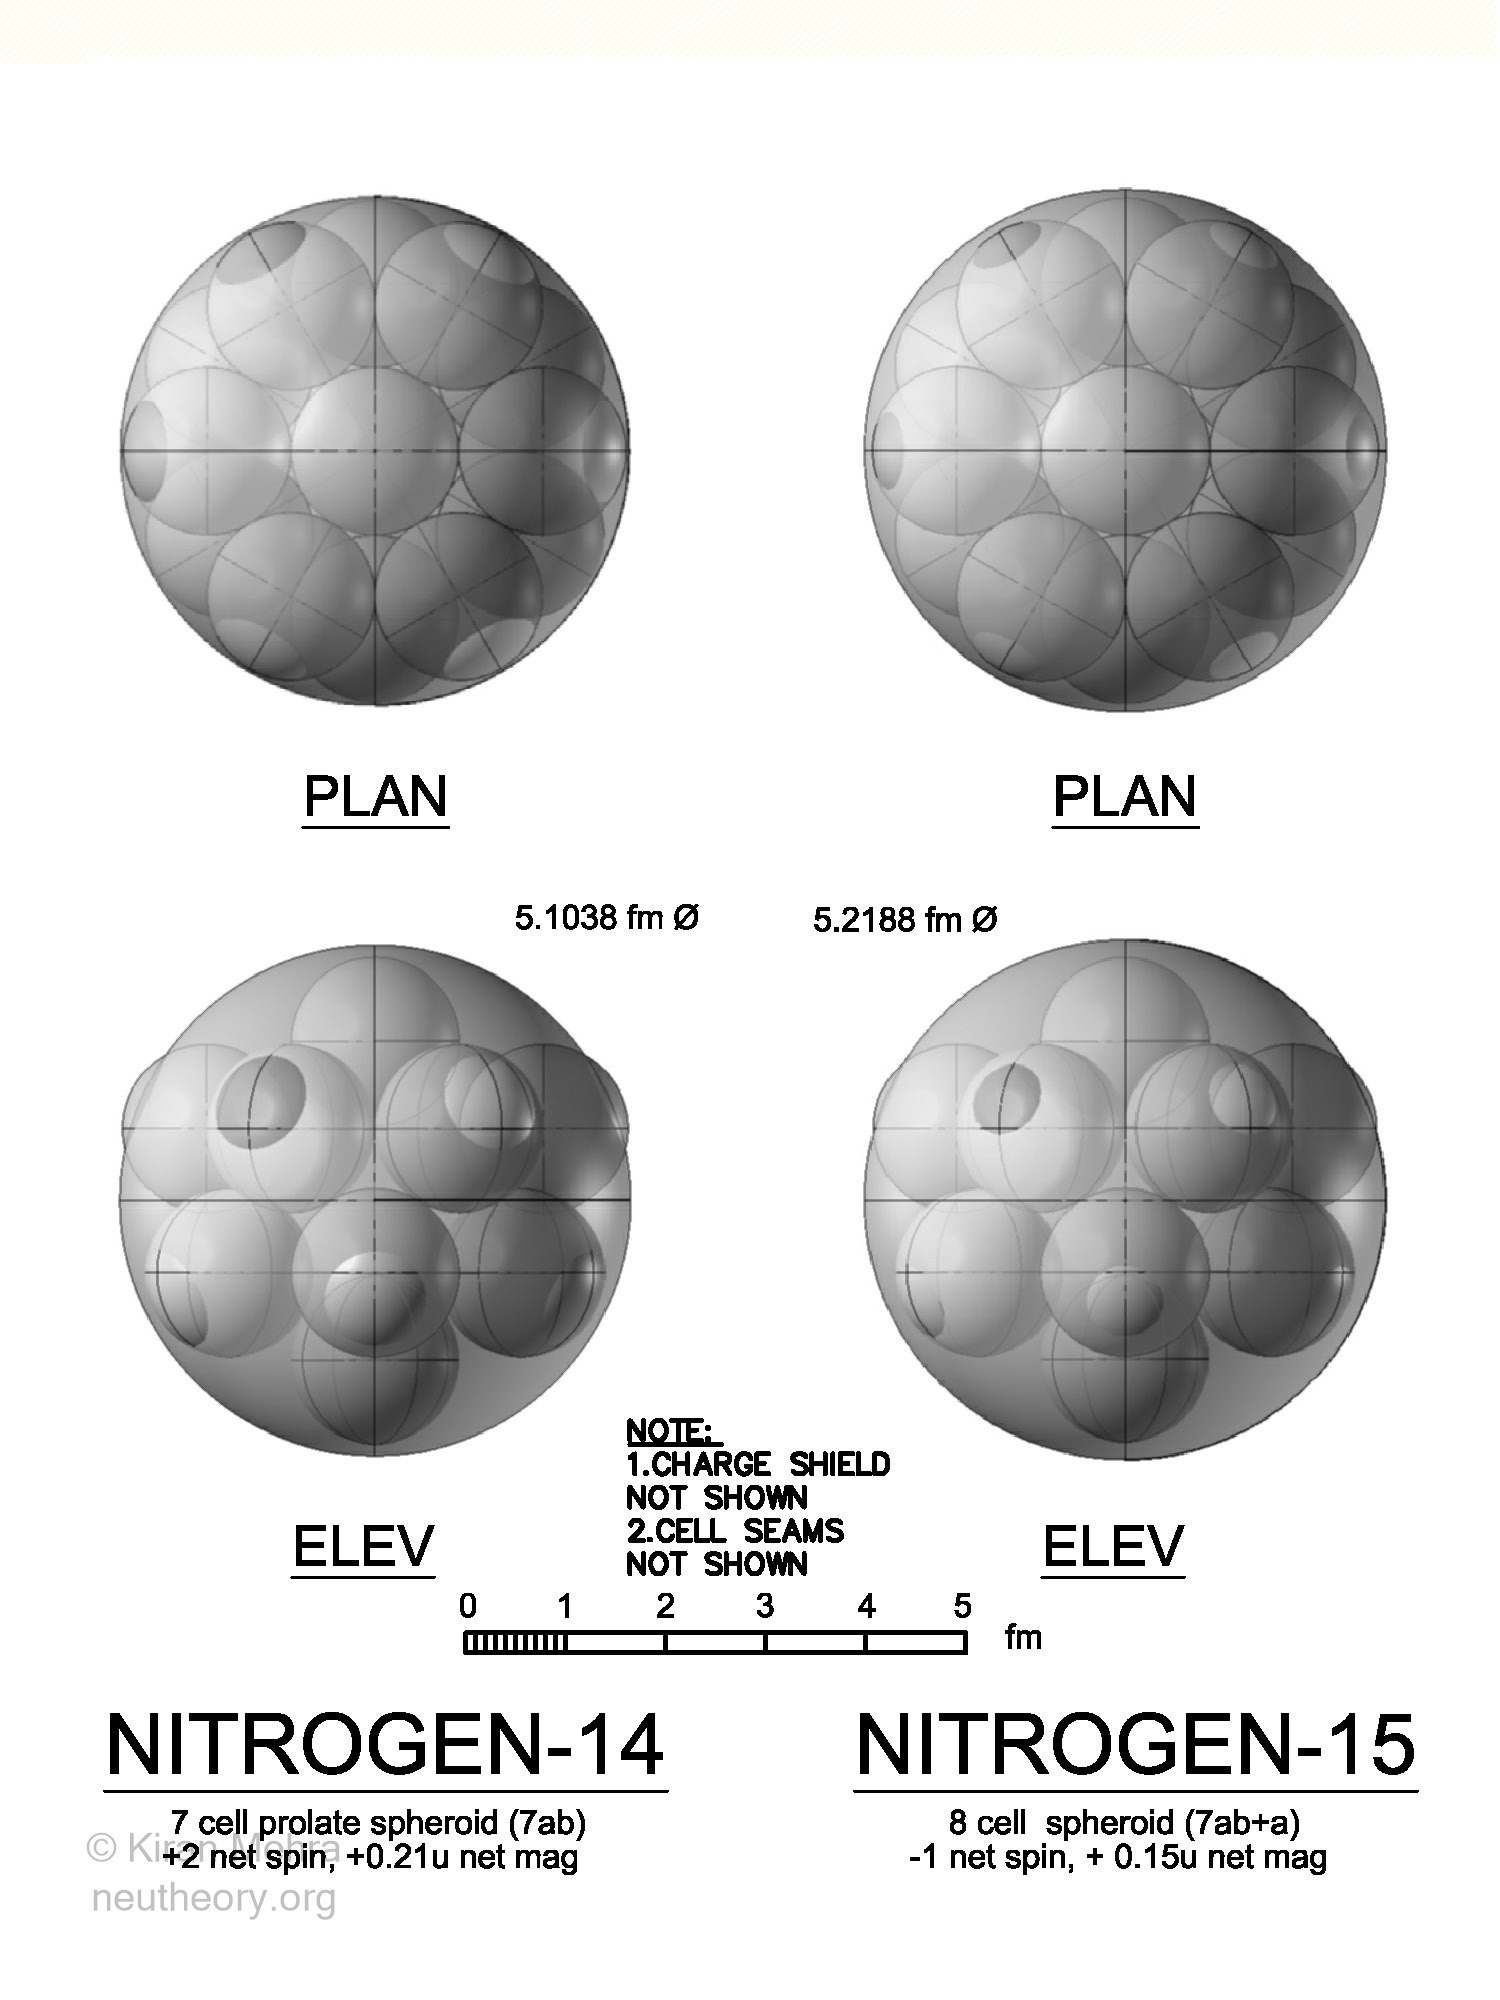 3D graphic images of deuteron and neutron cells clustering to form nitrogen-14 and nitrogen-15 nuclides